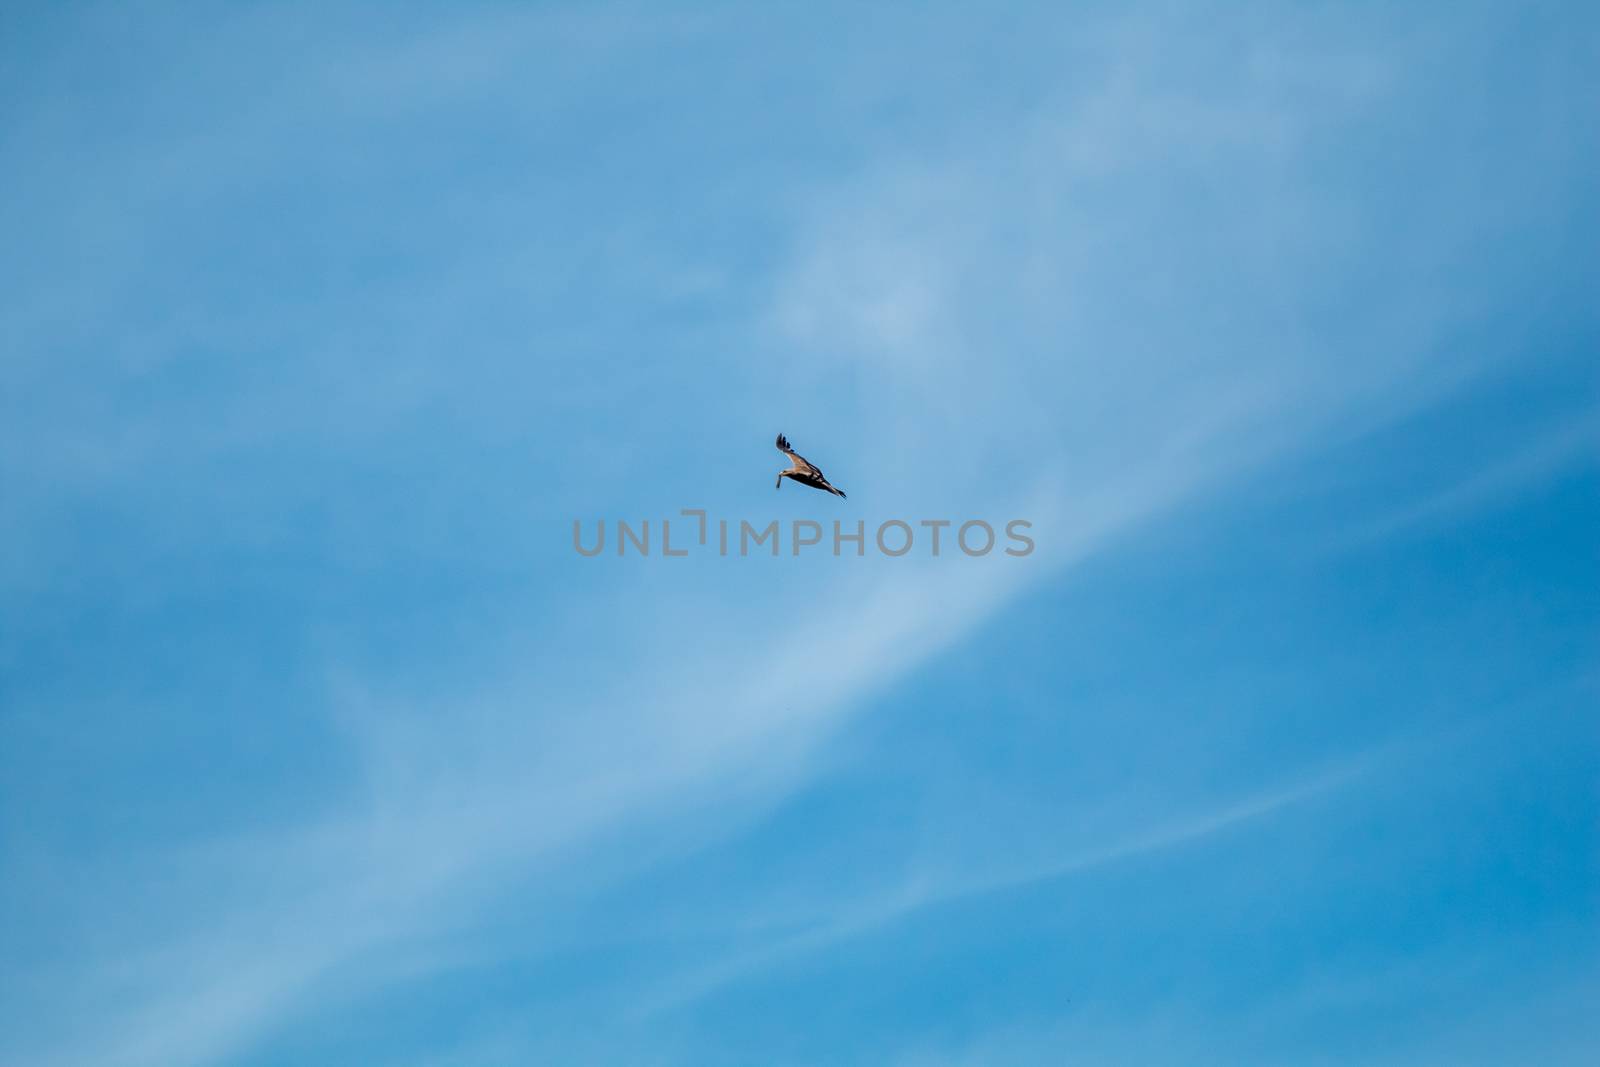 Hawk with prey. Hawk flying in the blue sky. Hawk hunted the mouse. Hawk flying high in the blue sky hunting for food.

